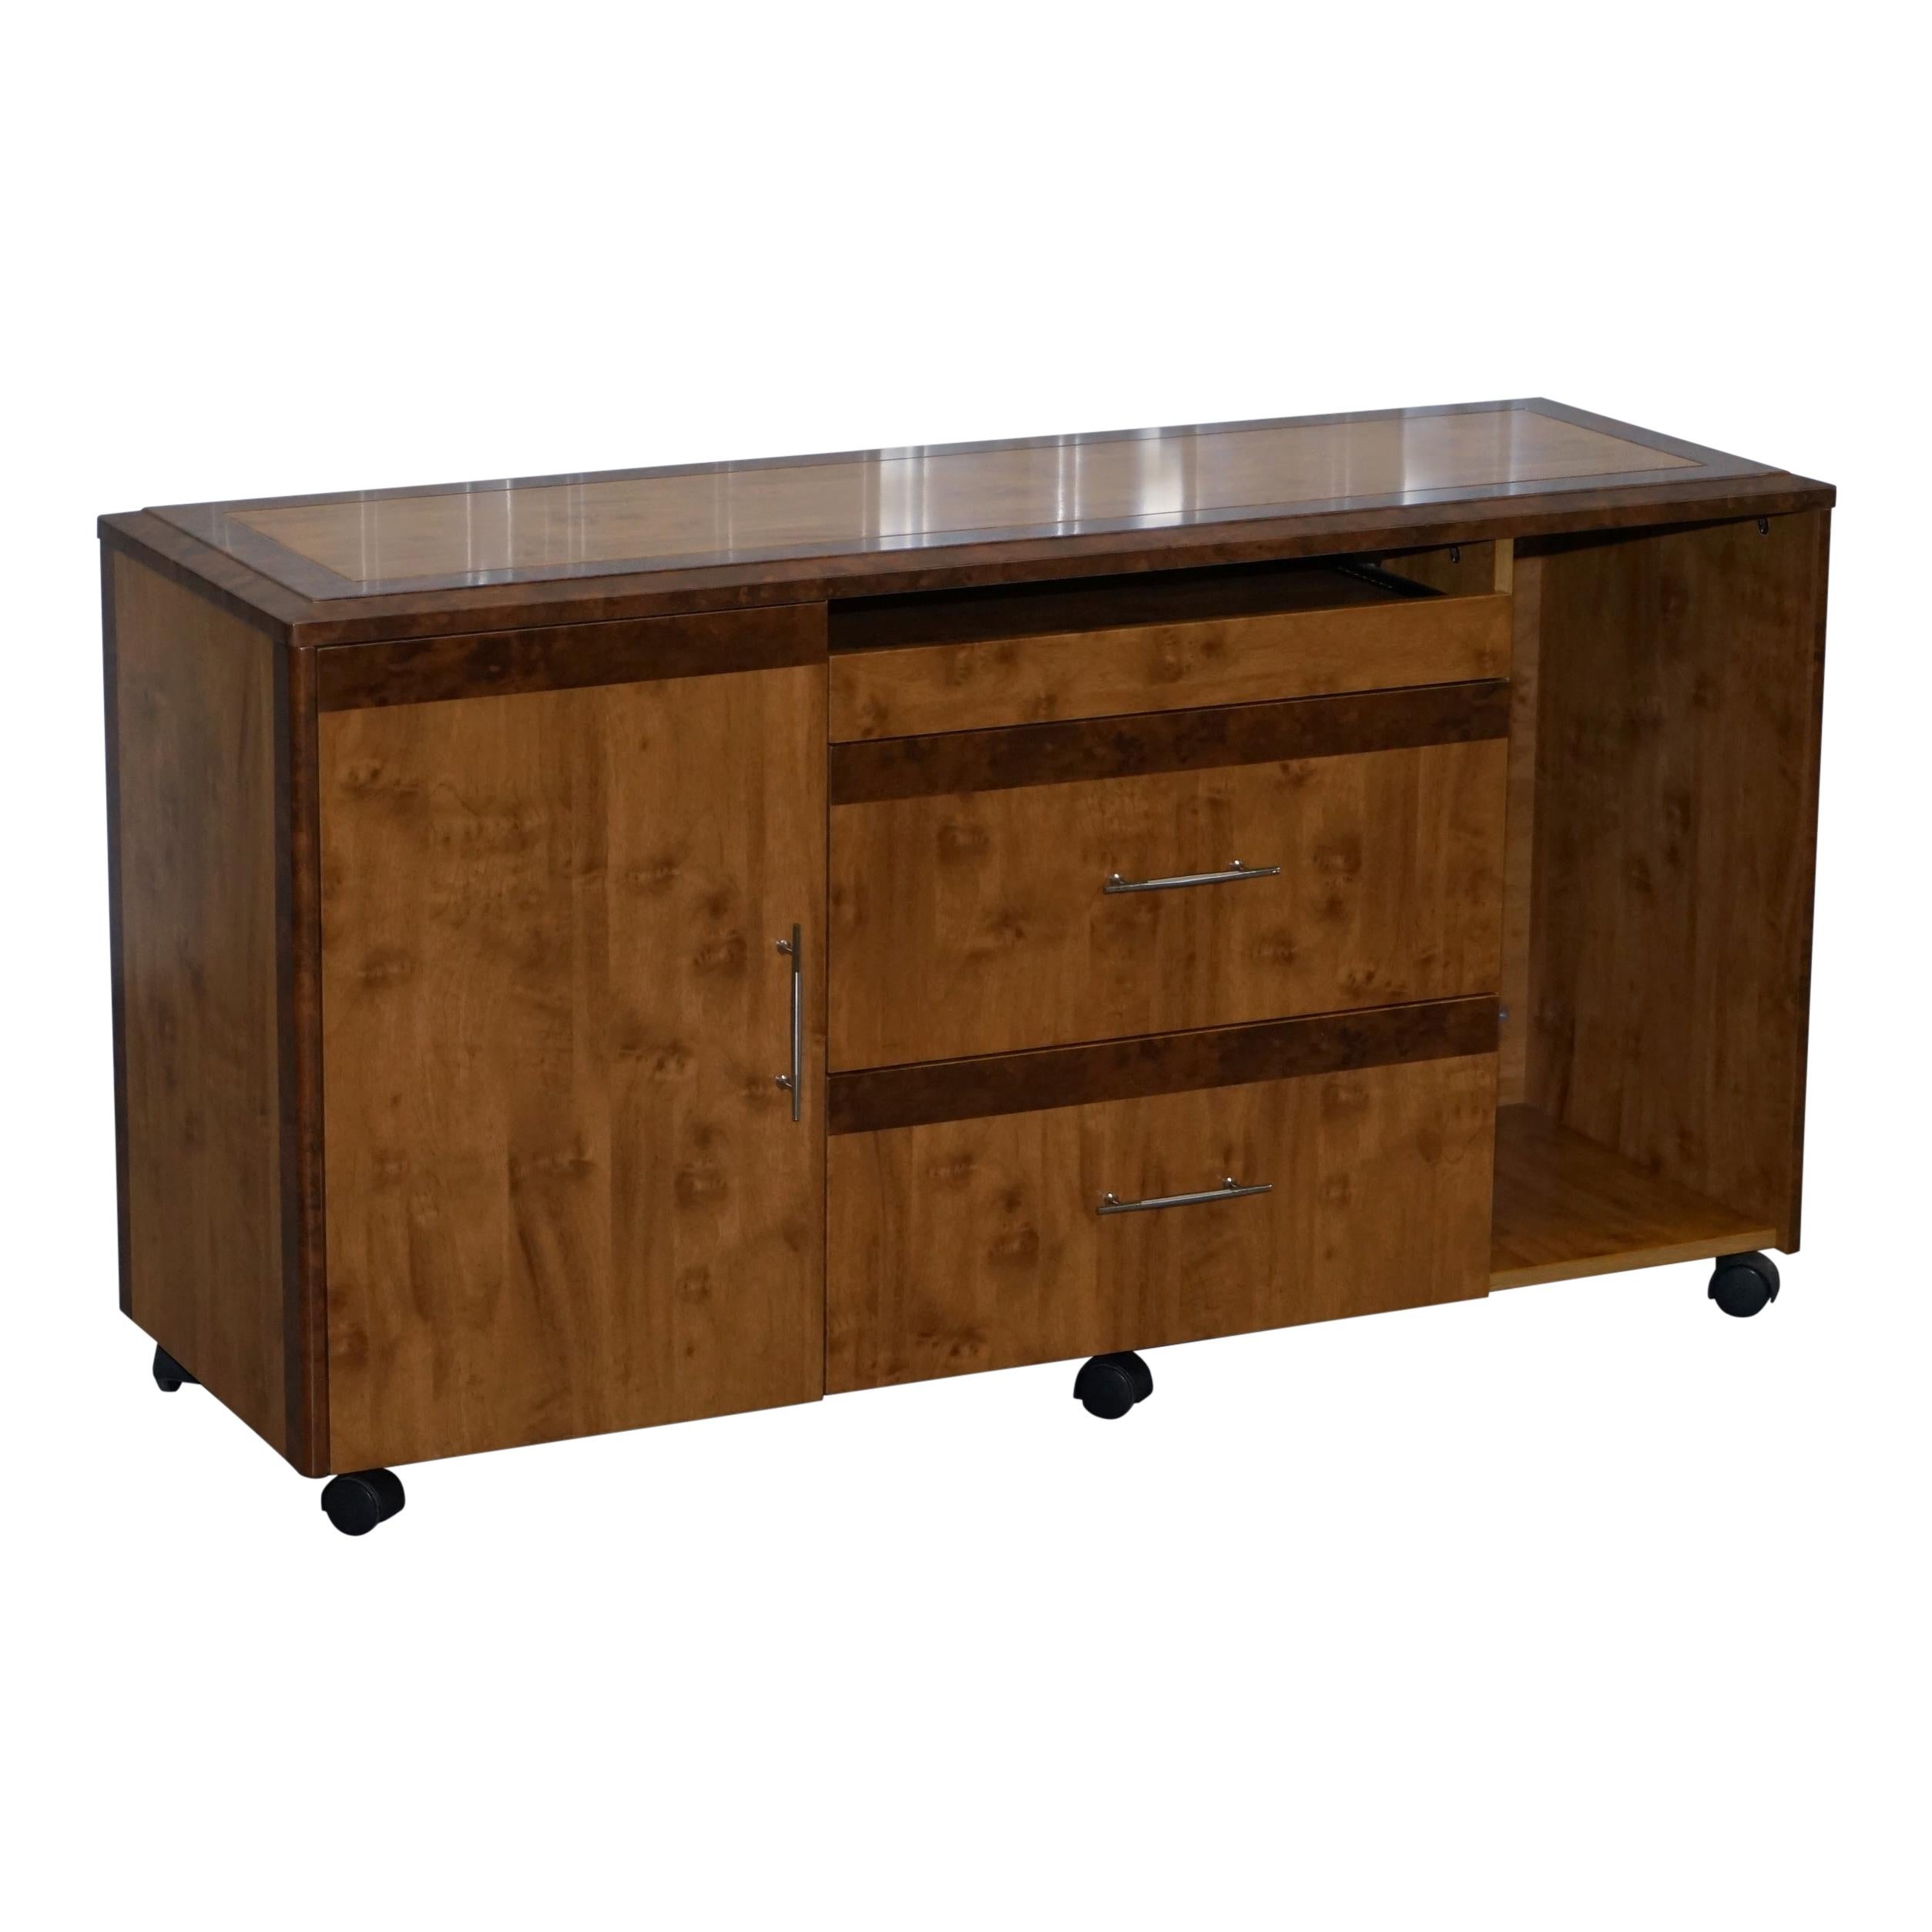 Burr Walnut Sideboard TV Stand Drawers Designed to House Computer Part of Suite For Sale